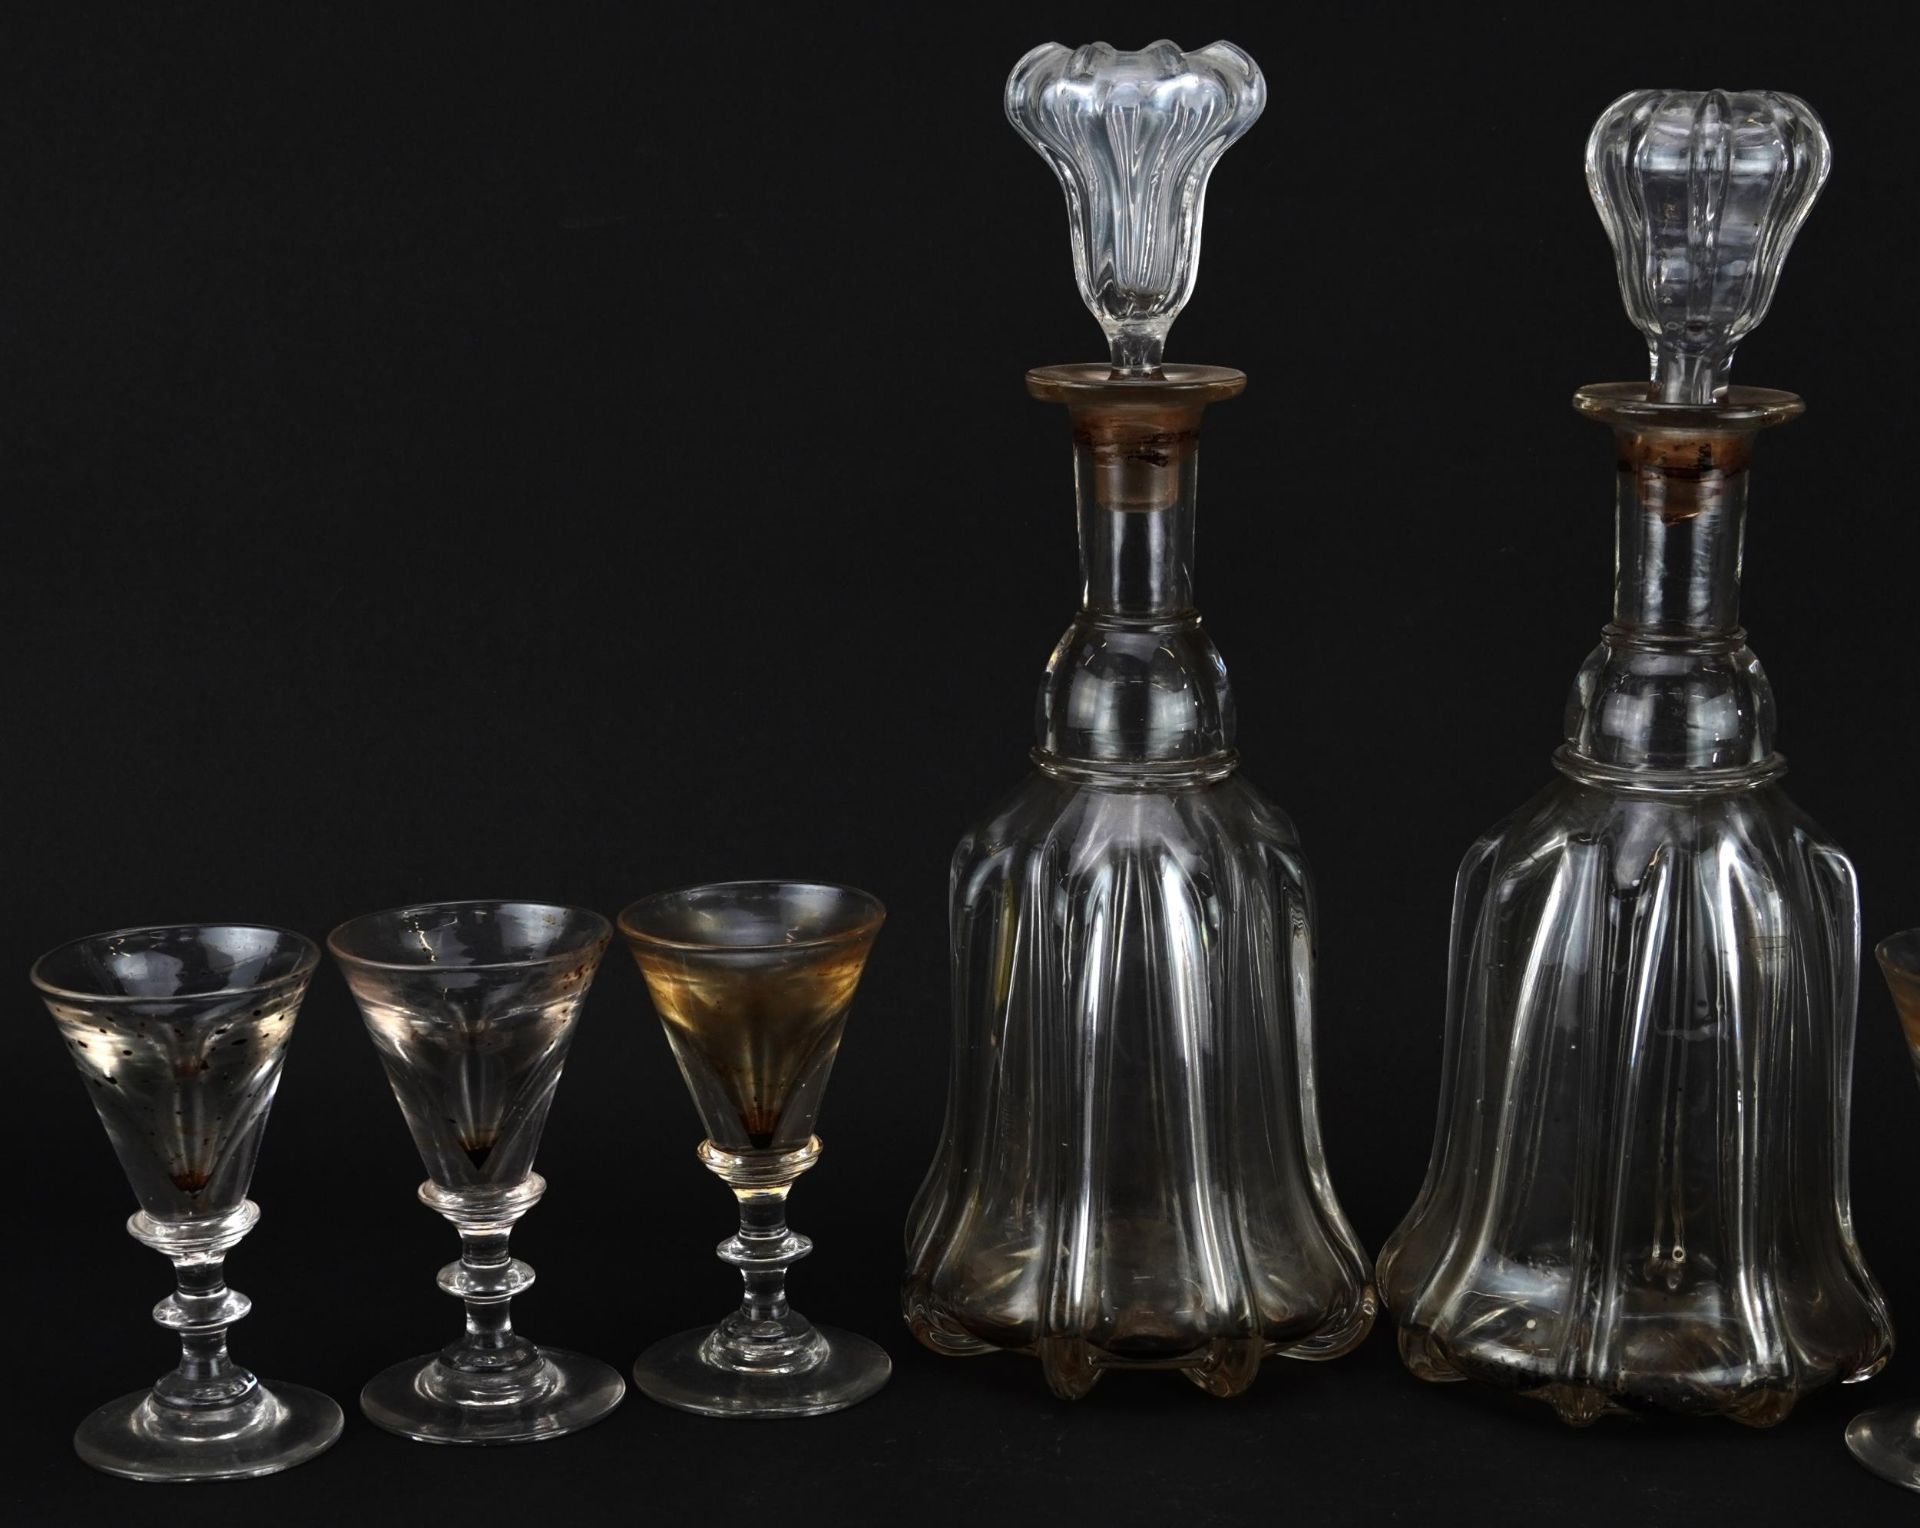 Set of six 18th century illusion glasses and a pair of decanters, the largest 31cm high - Image 2 of 3